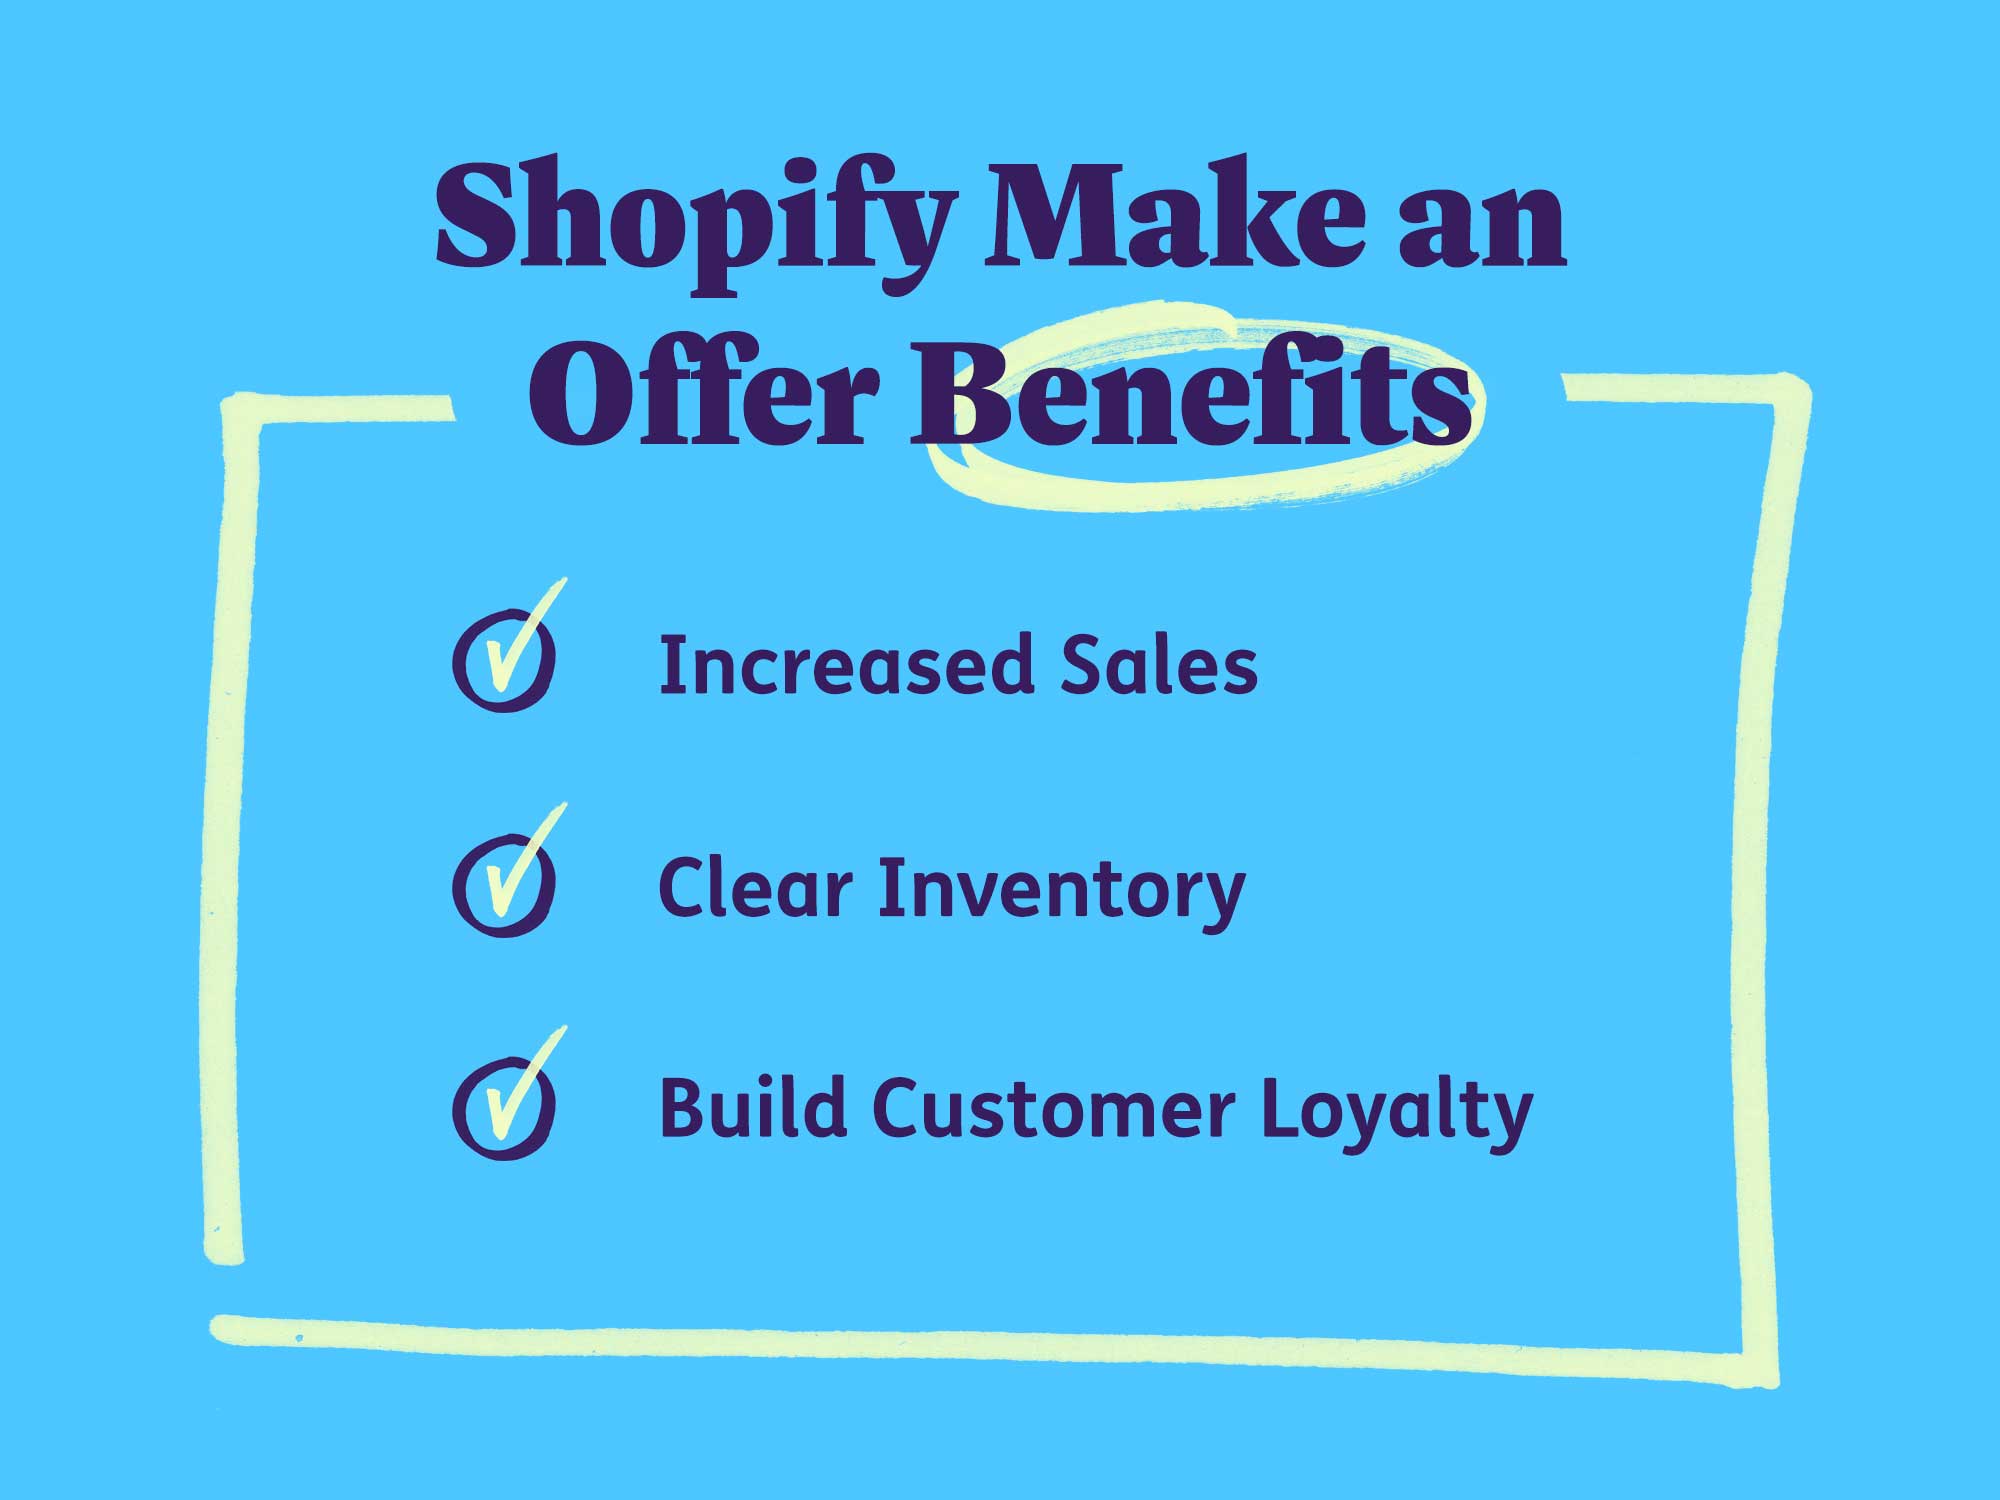 Shopify Make an Offer Benefits: Increased Sales, Clear Inventory, and Build Customer Loyalty